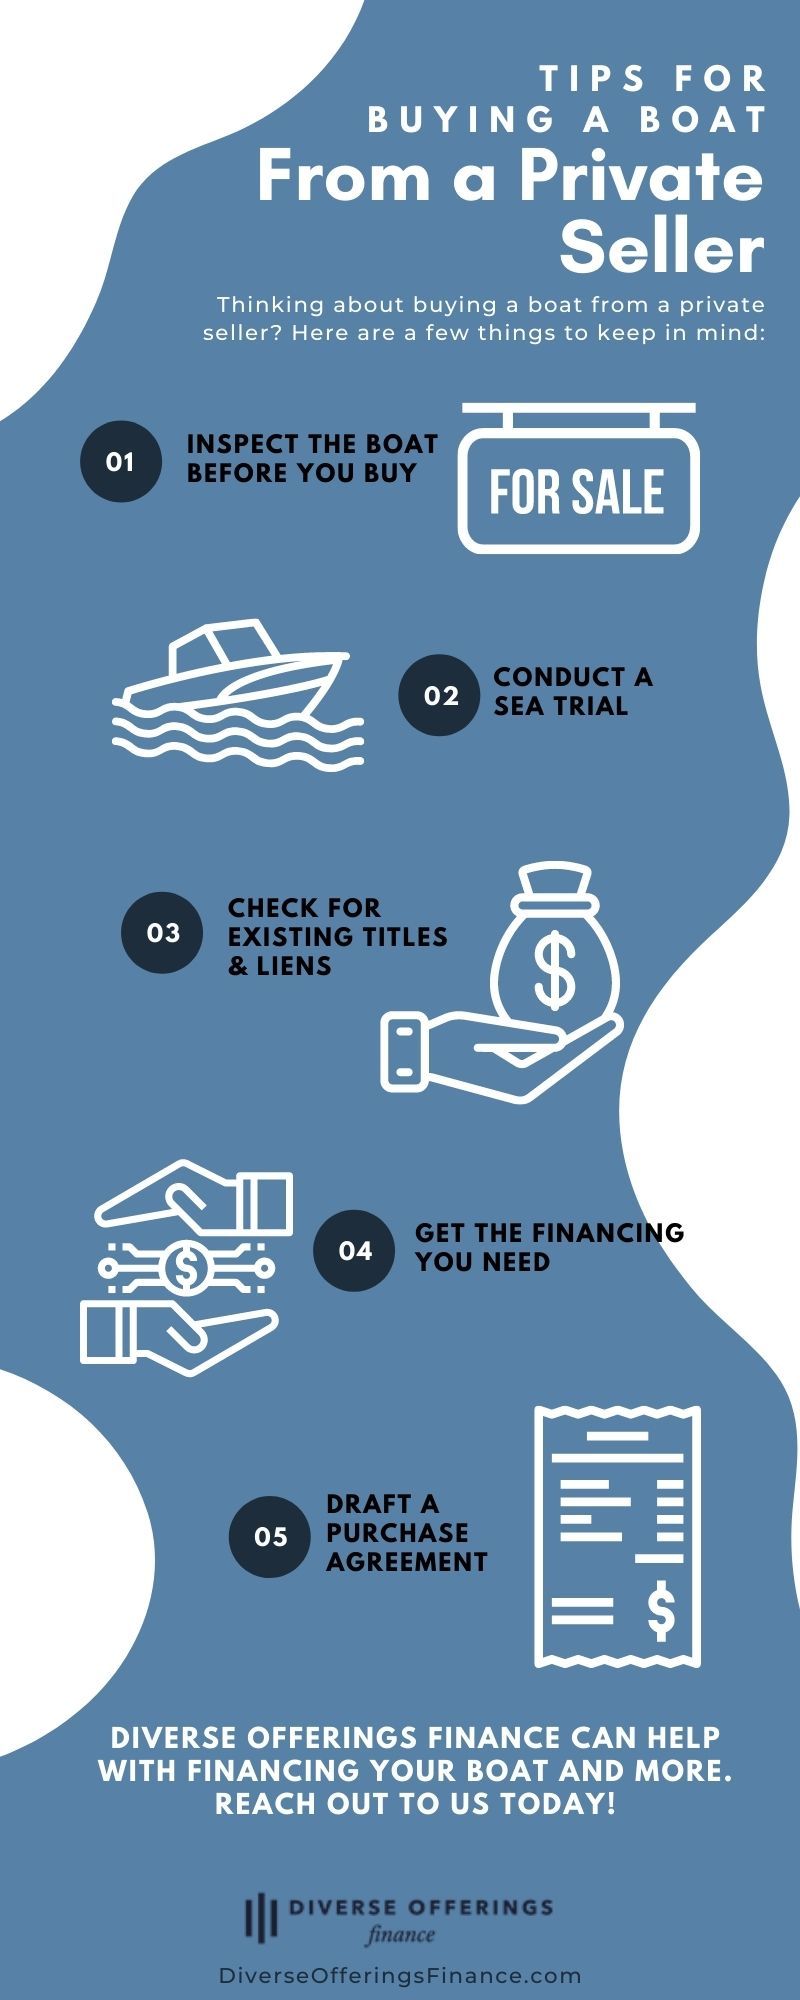 M35155 - Diverse Offerings Finance - Infographic - Tips for Buying a Boat From a Private Seller.jpg